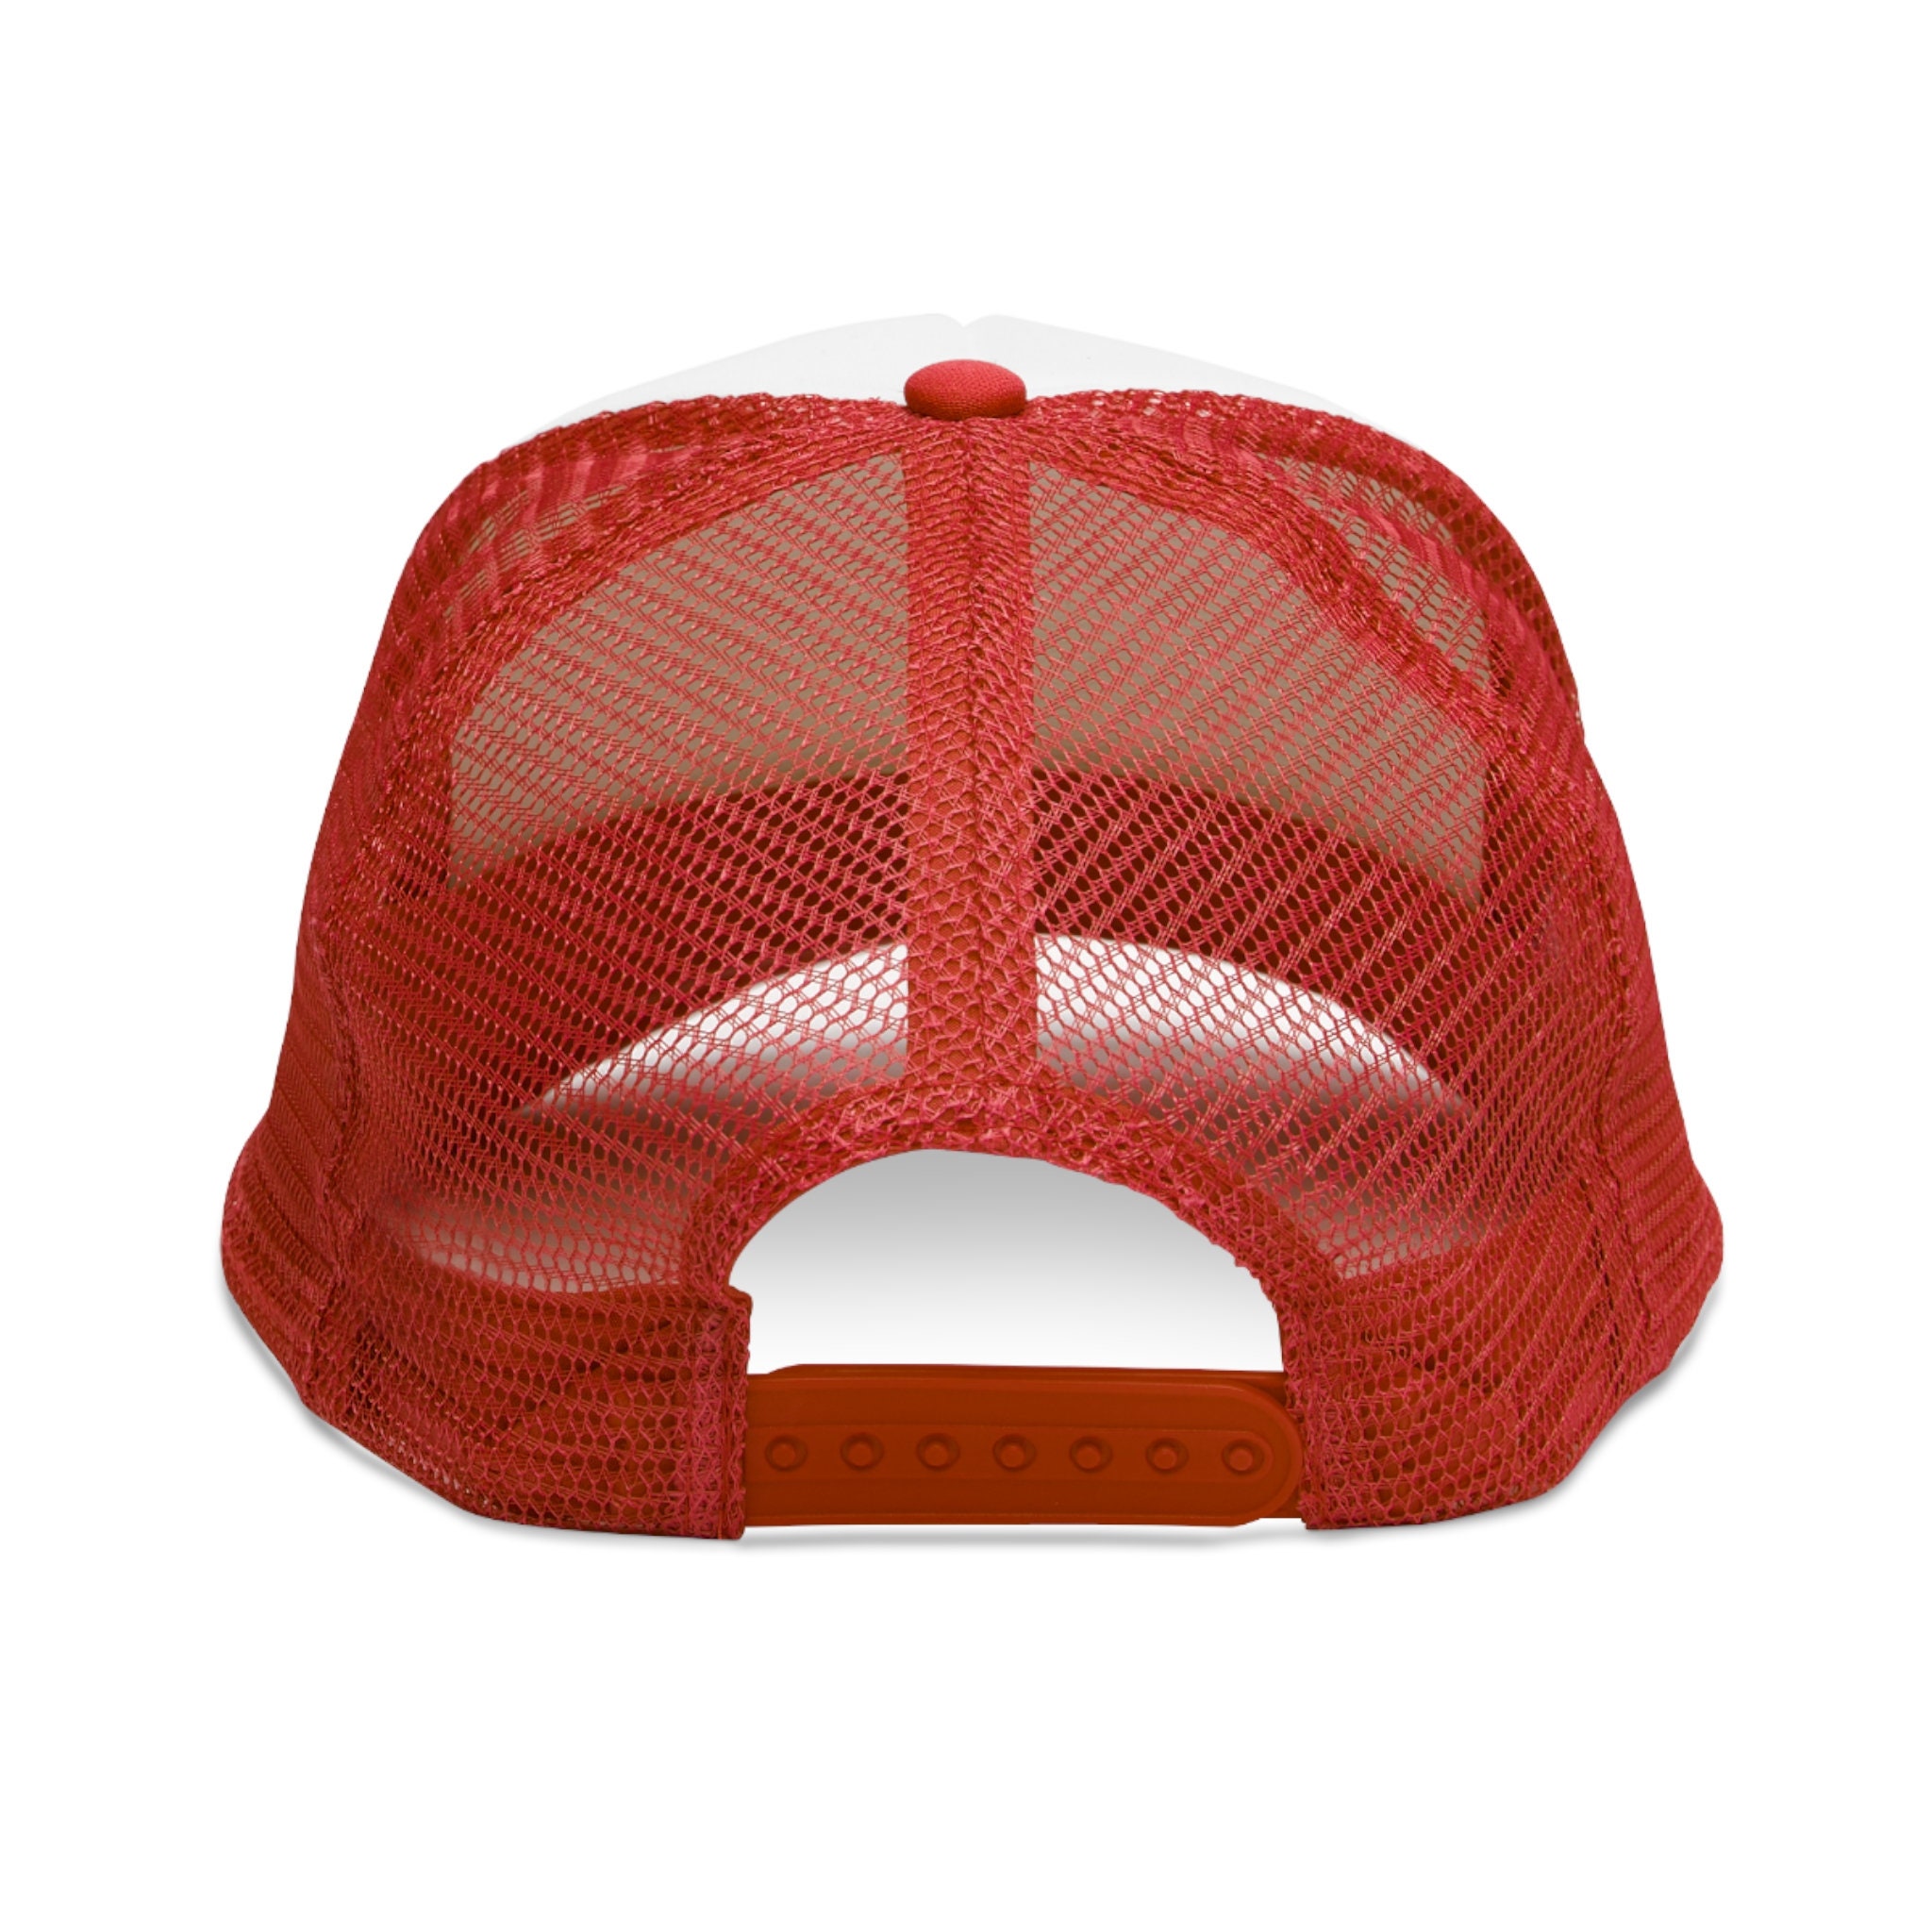 Sub Surf Mesh Trucker's Cap for Costume or Every Day 